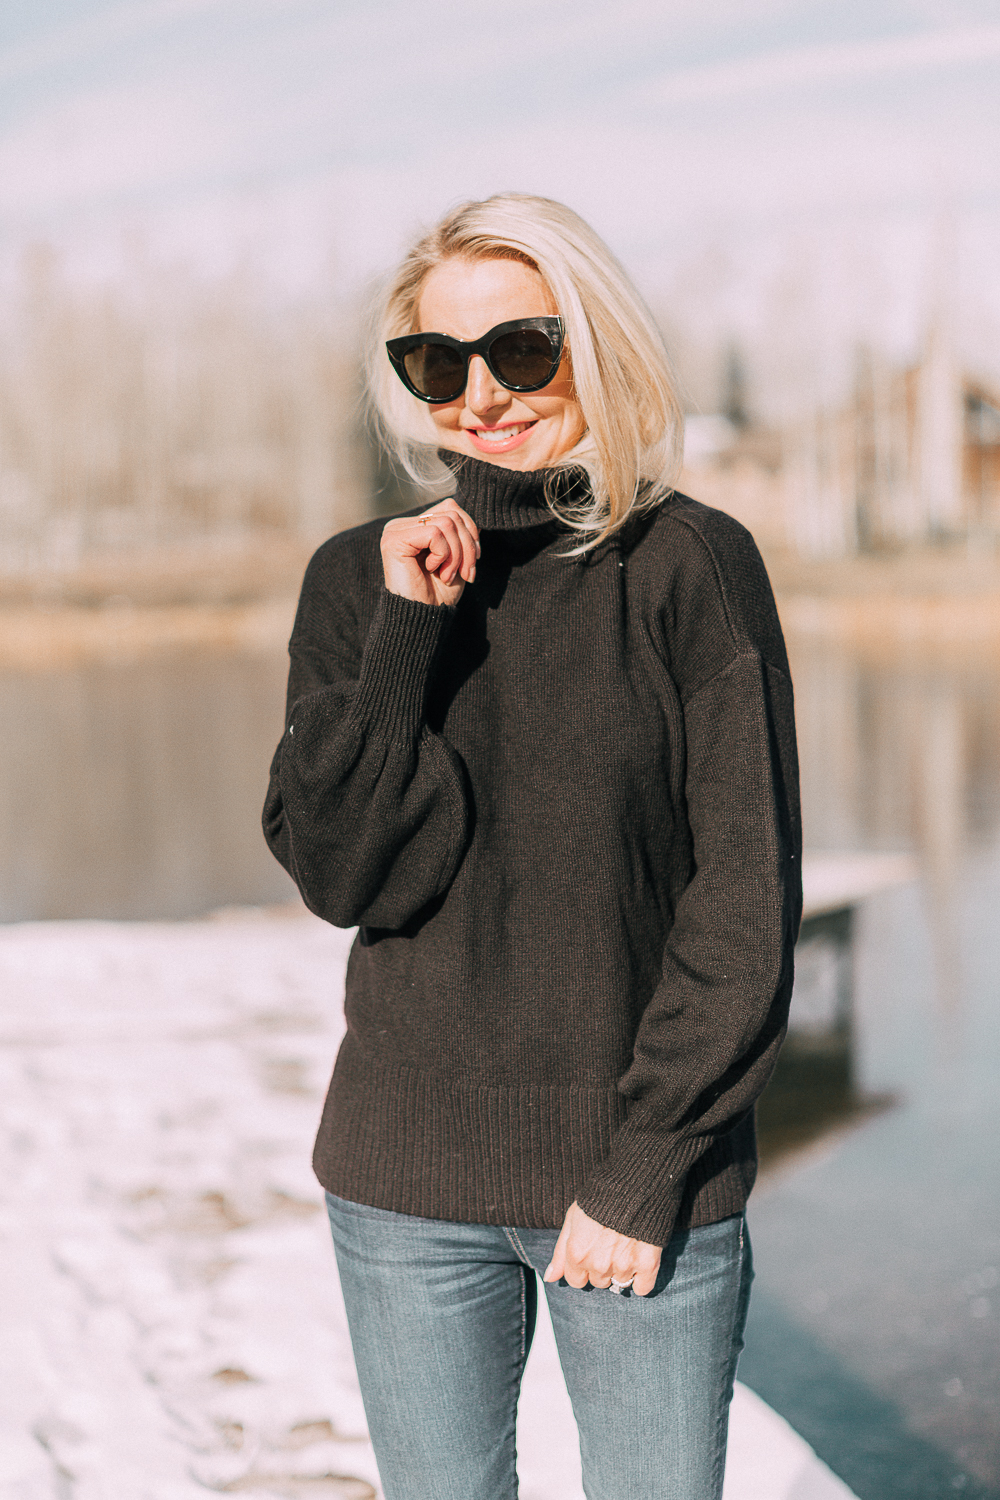 Best sweaters for fall for women 2018 featuring a balloon sleeve black turtleneck sweater from JCPenney on blonde fashion blogger